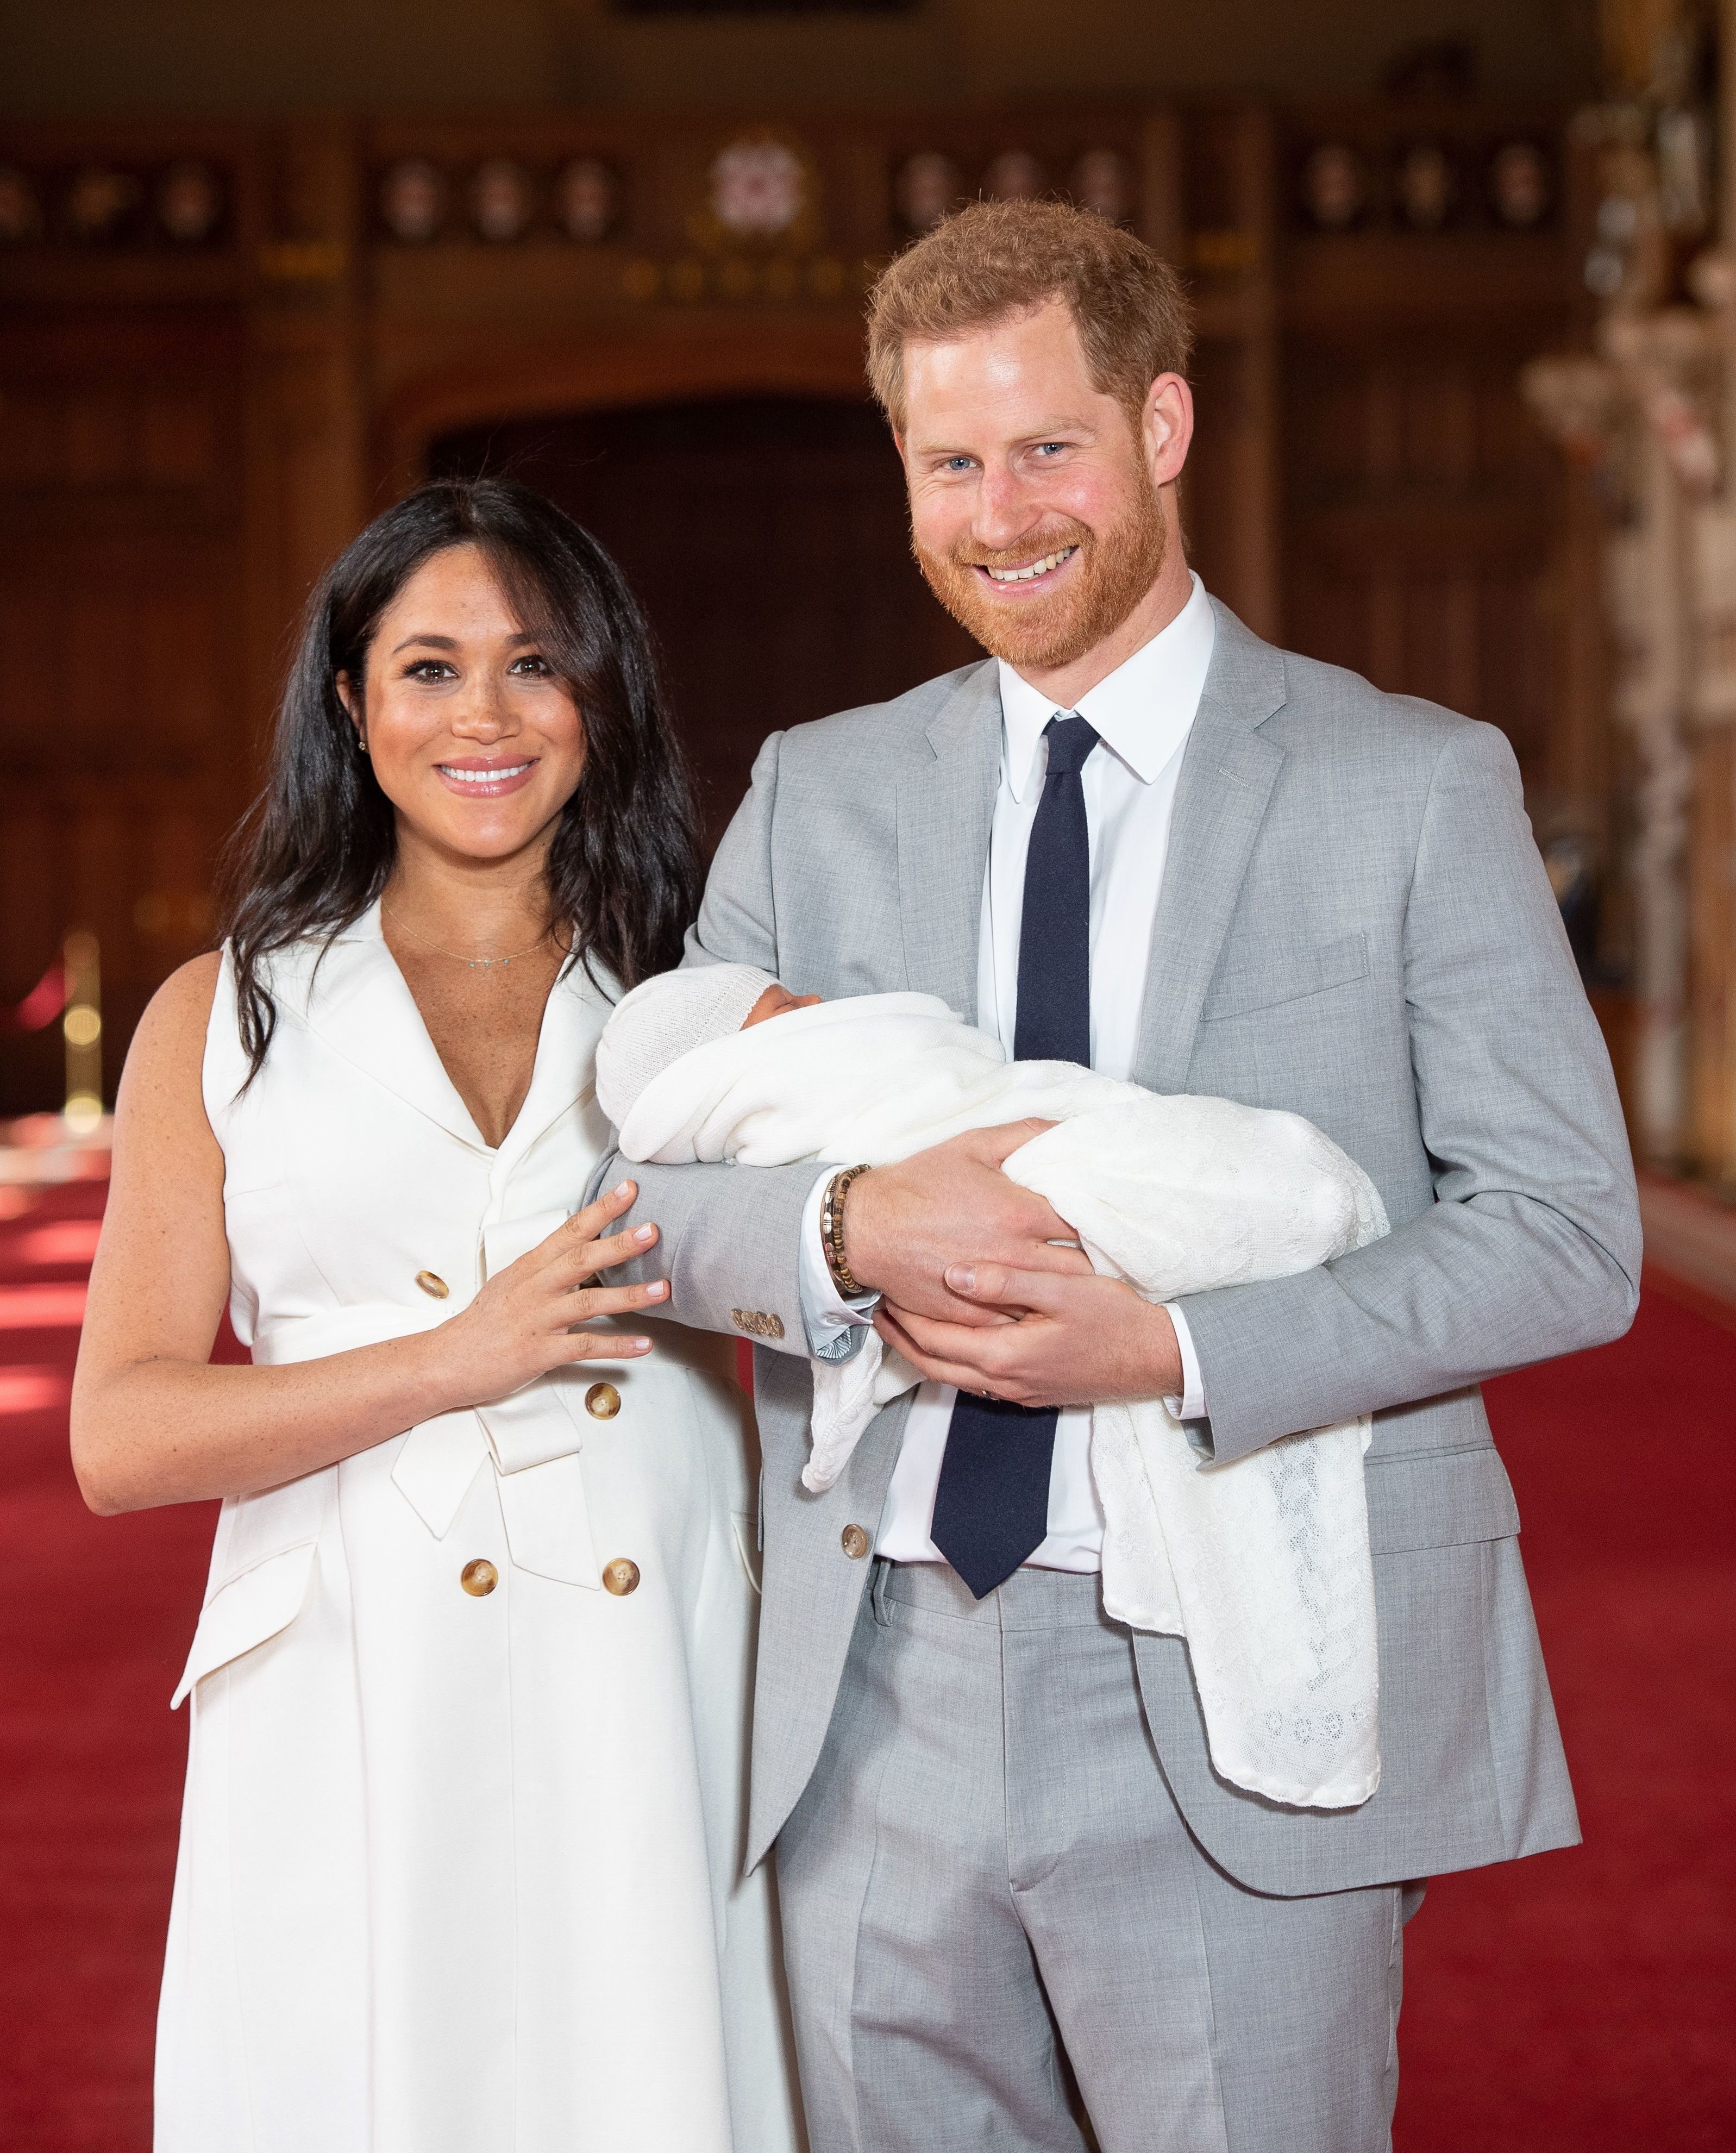 Duke and Duchess of sussex with royal baby sussex